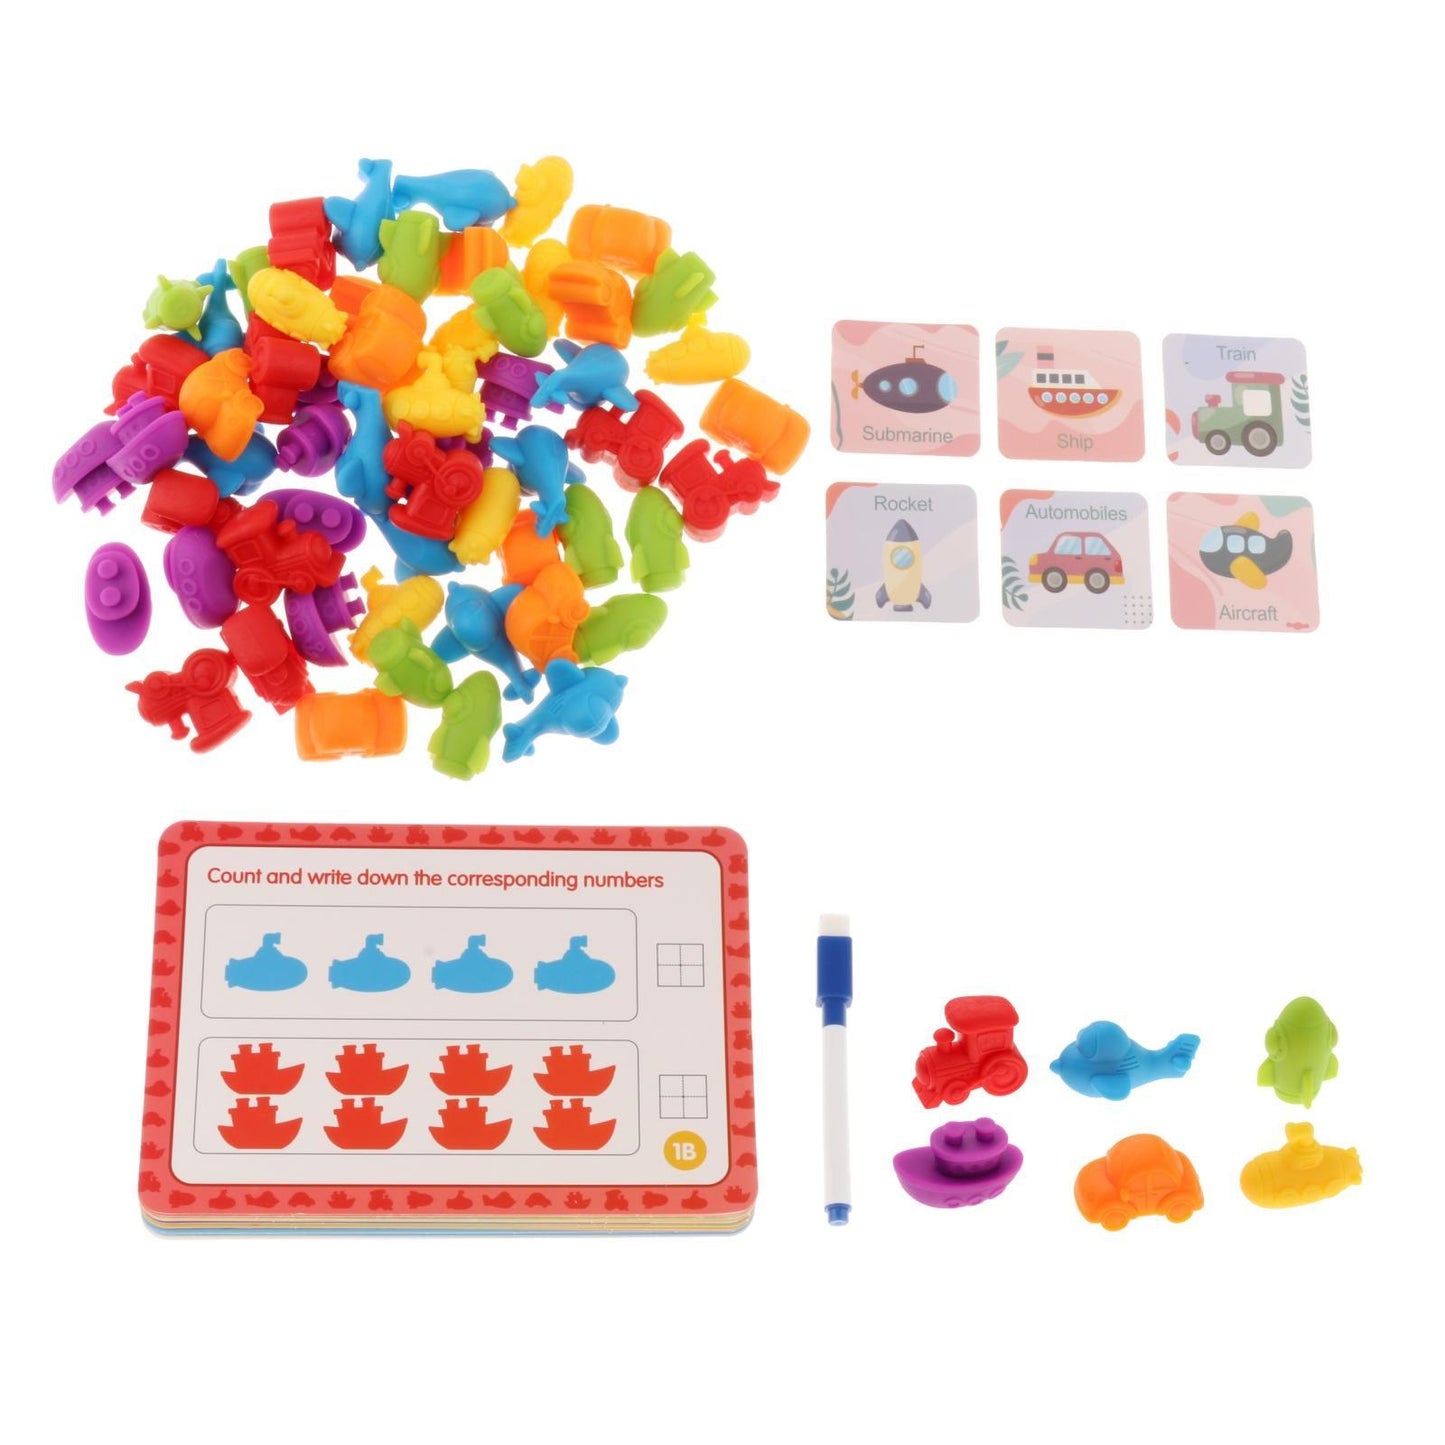 Means of Transportation Match & Sort Playset